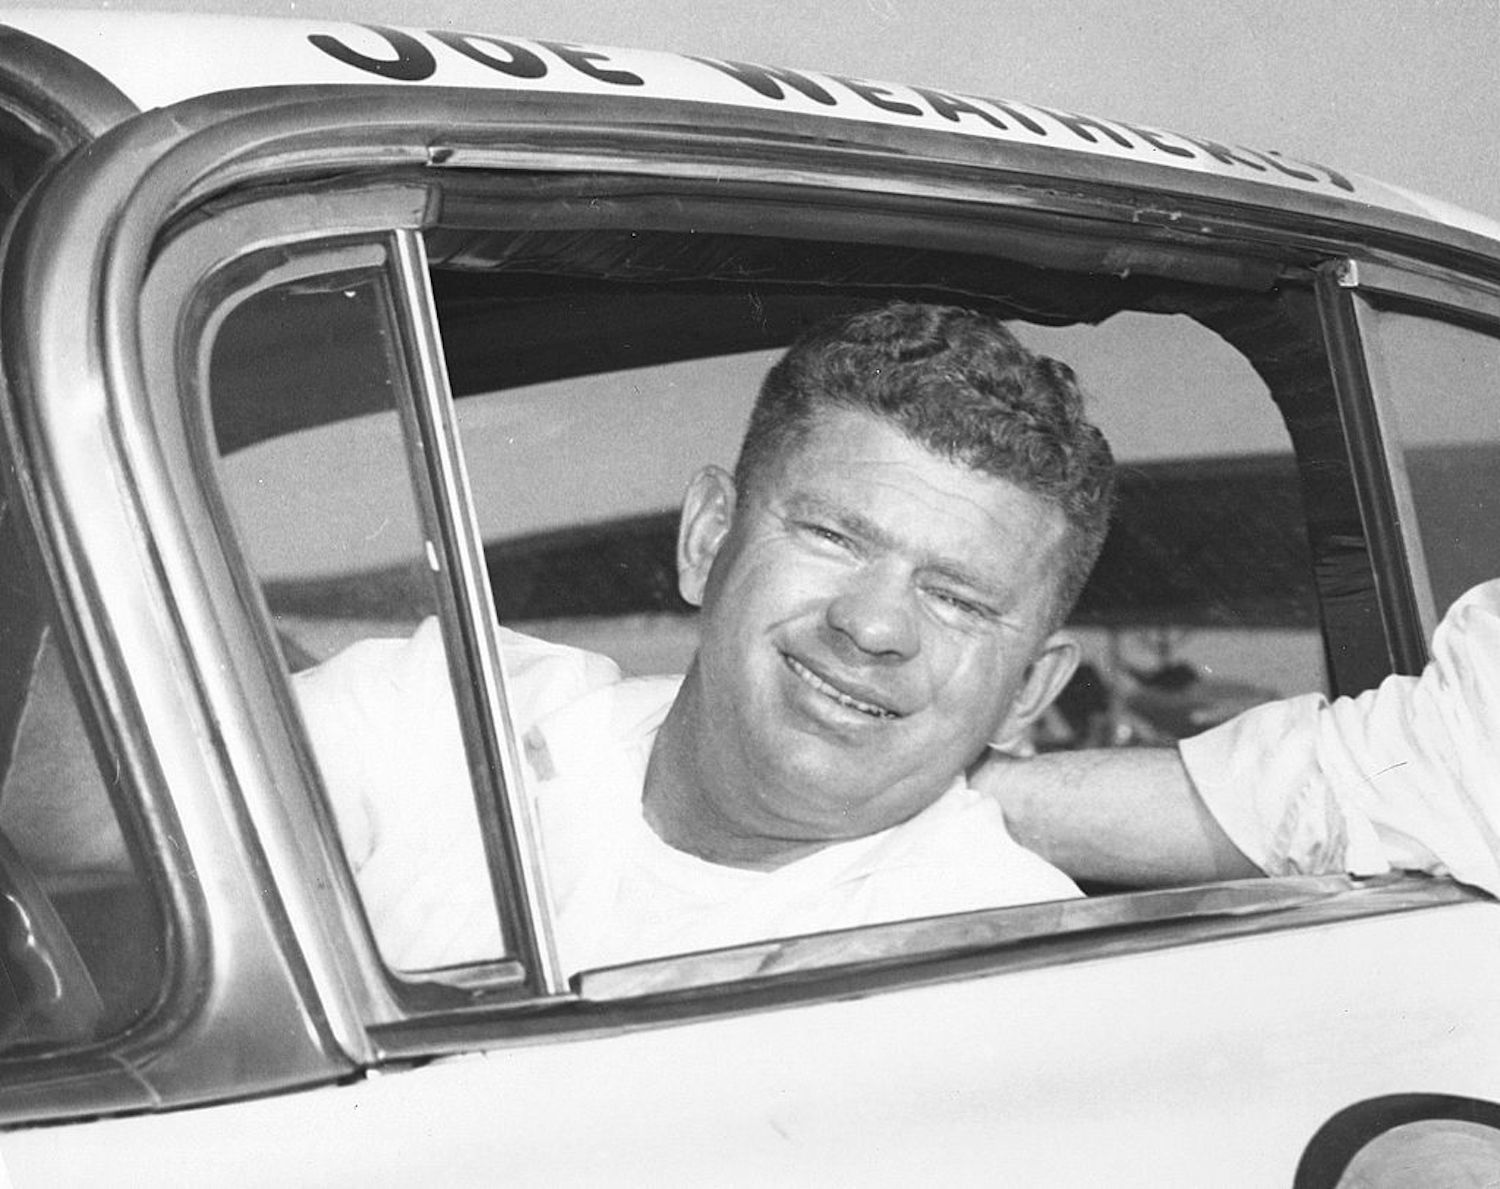 Joe Weatherly was one of the most beloved NASCAR drivers in history, and his tragic death in 1964 changed the sport as we know it.